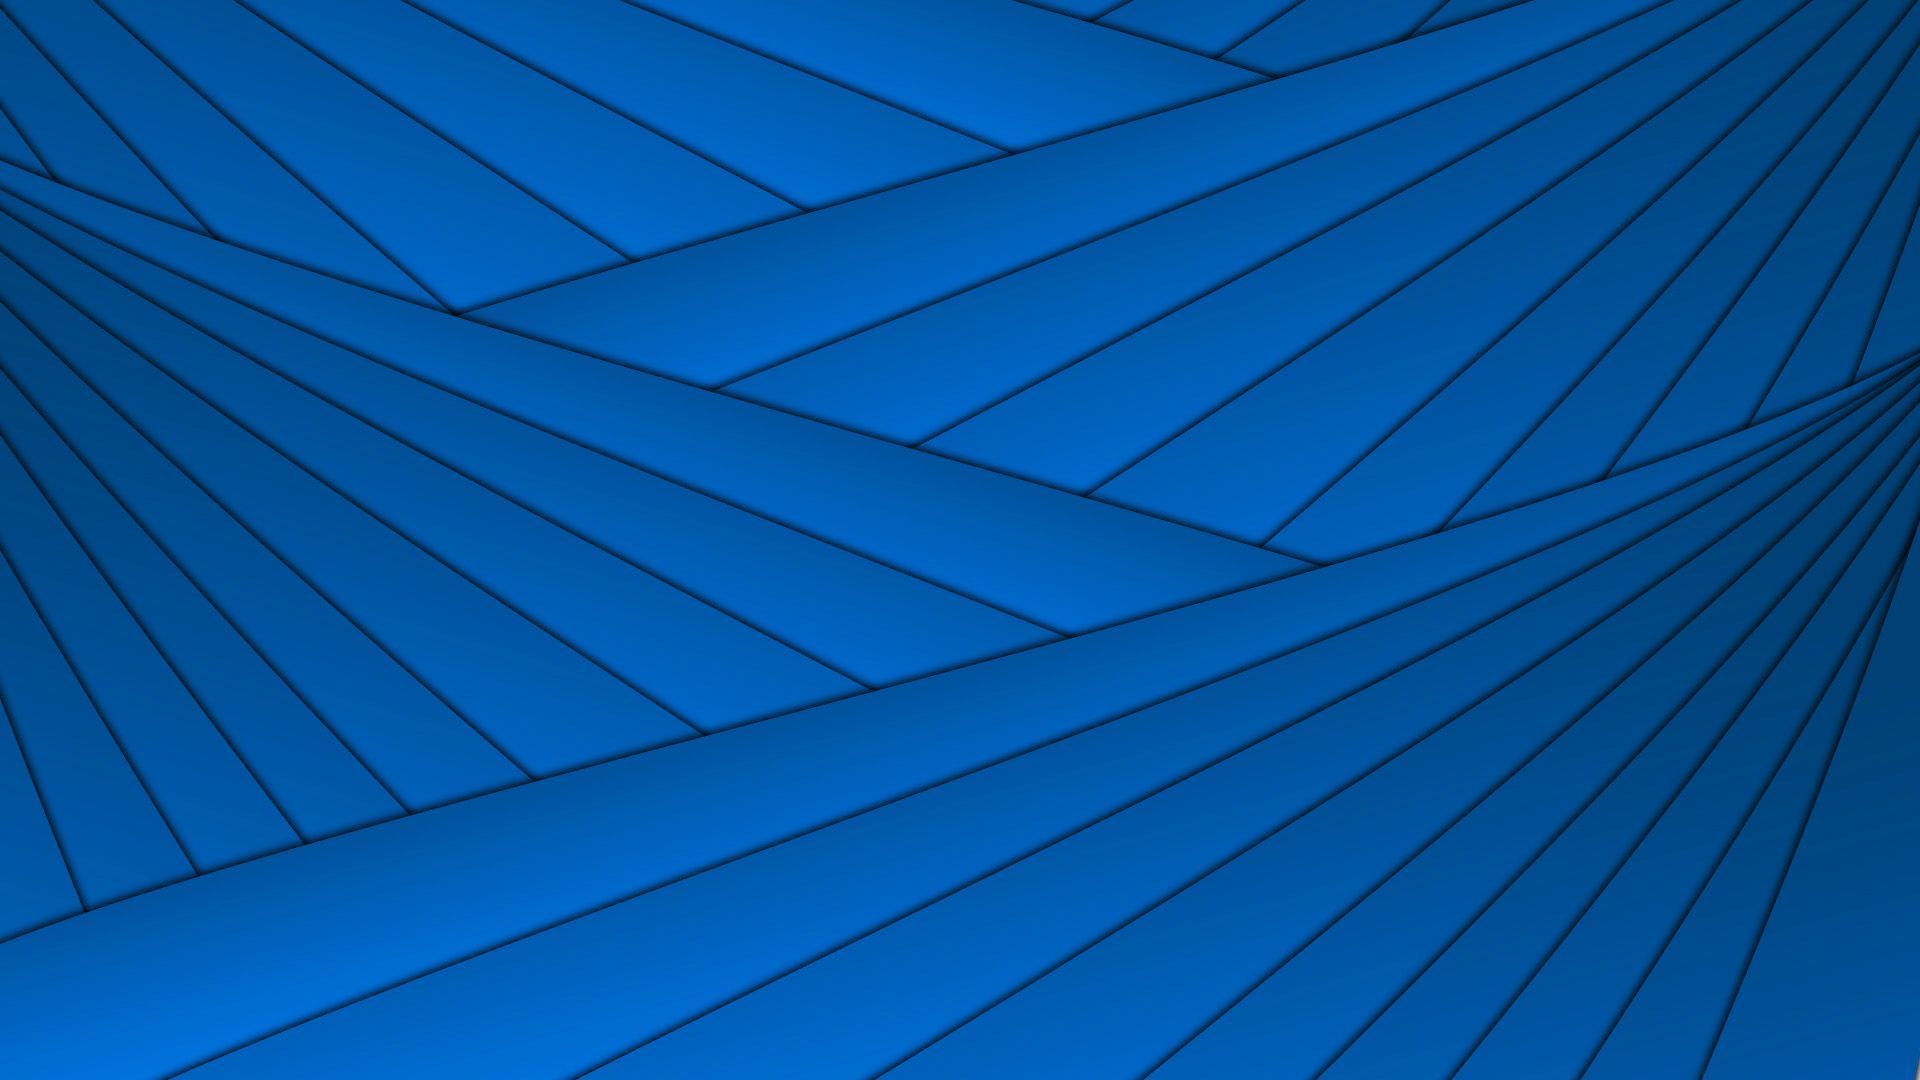 texture-blue-lines-vector-rays-background-hd-wallpaper.jpg